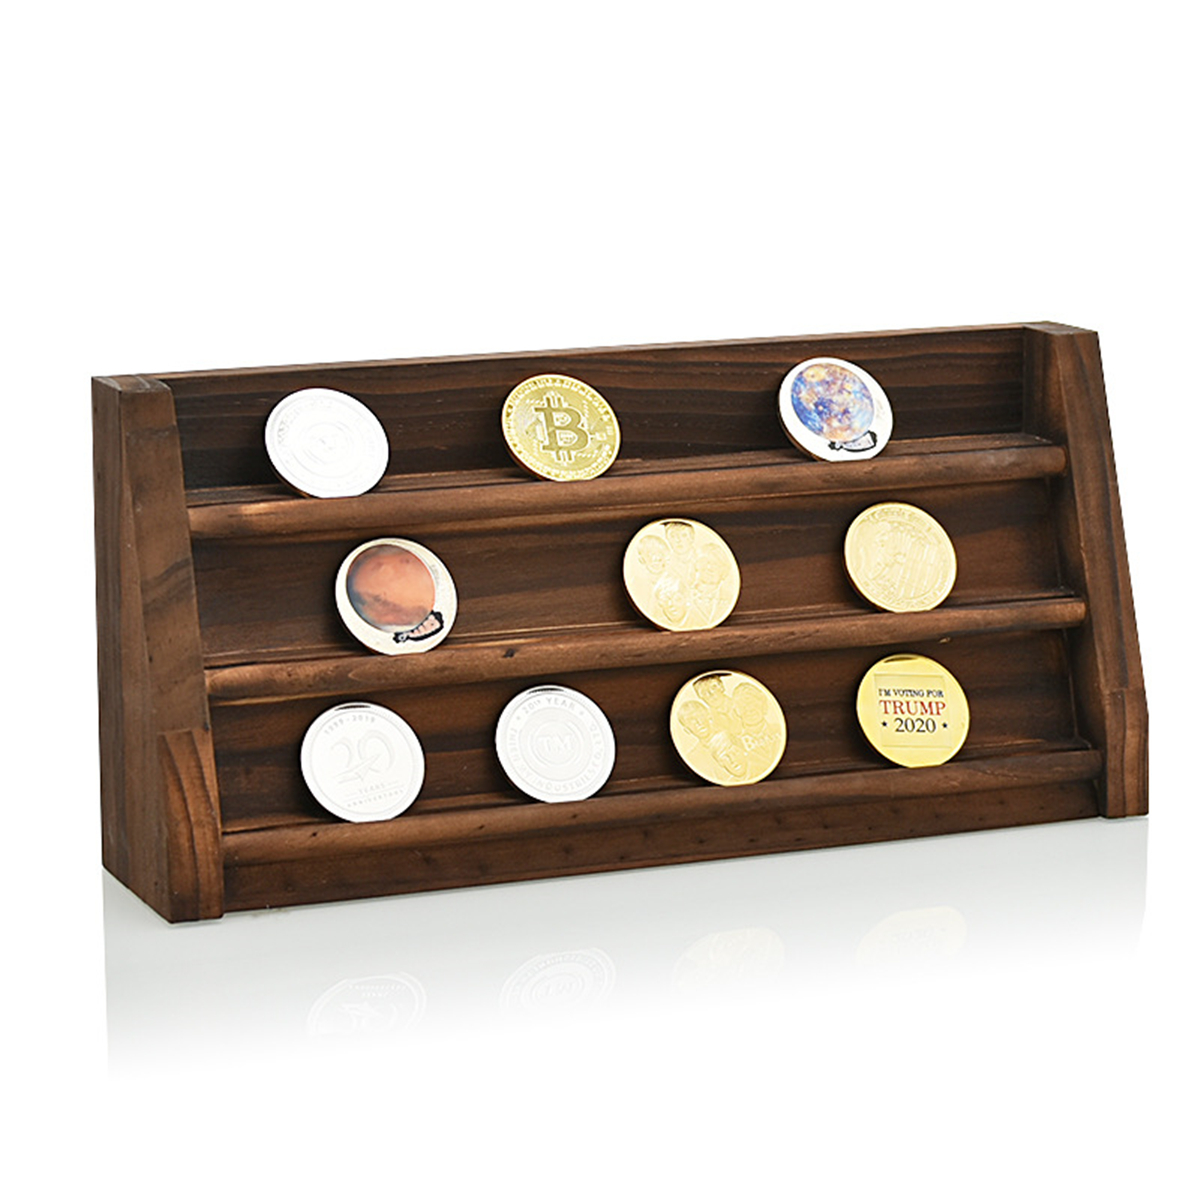 Wooden-Challenge-Collectible-Coin-Holder-Display-Rack-Stand-Case-Shelf-Decorations-1565457